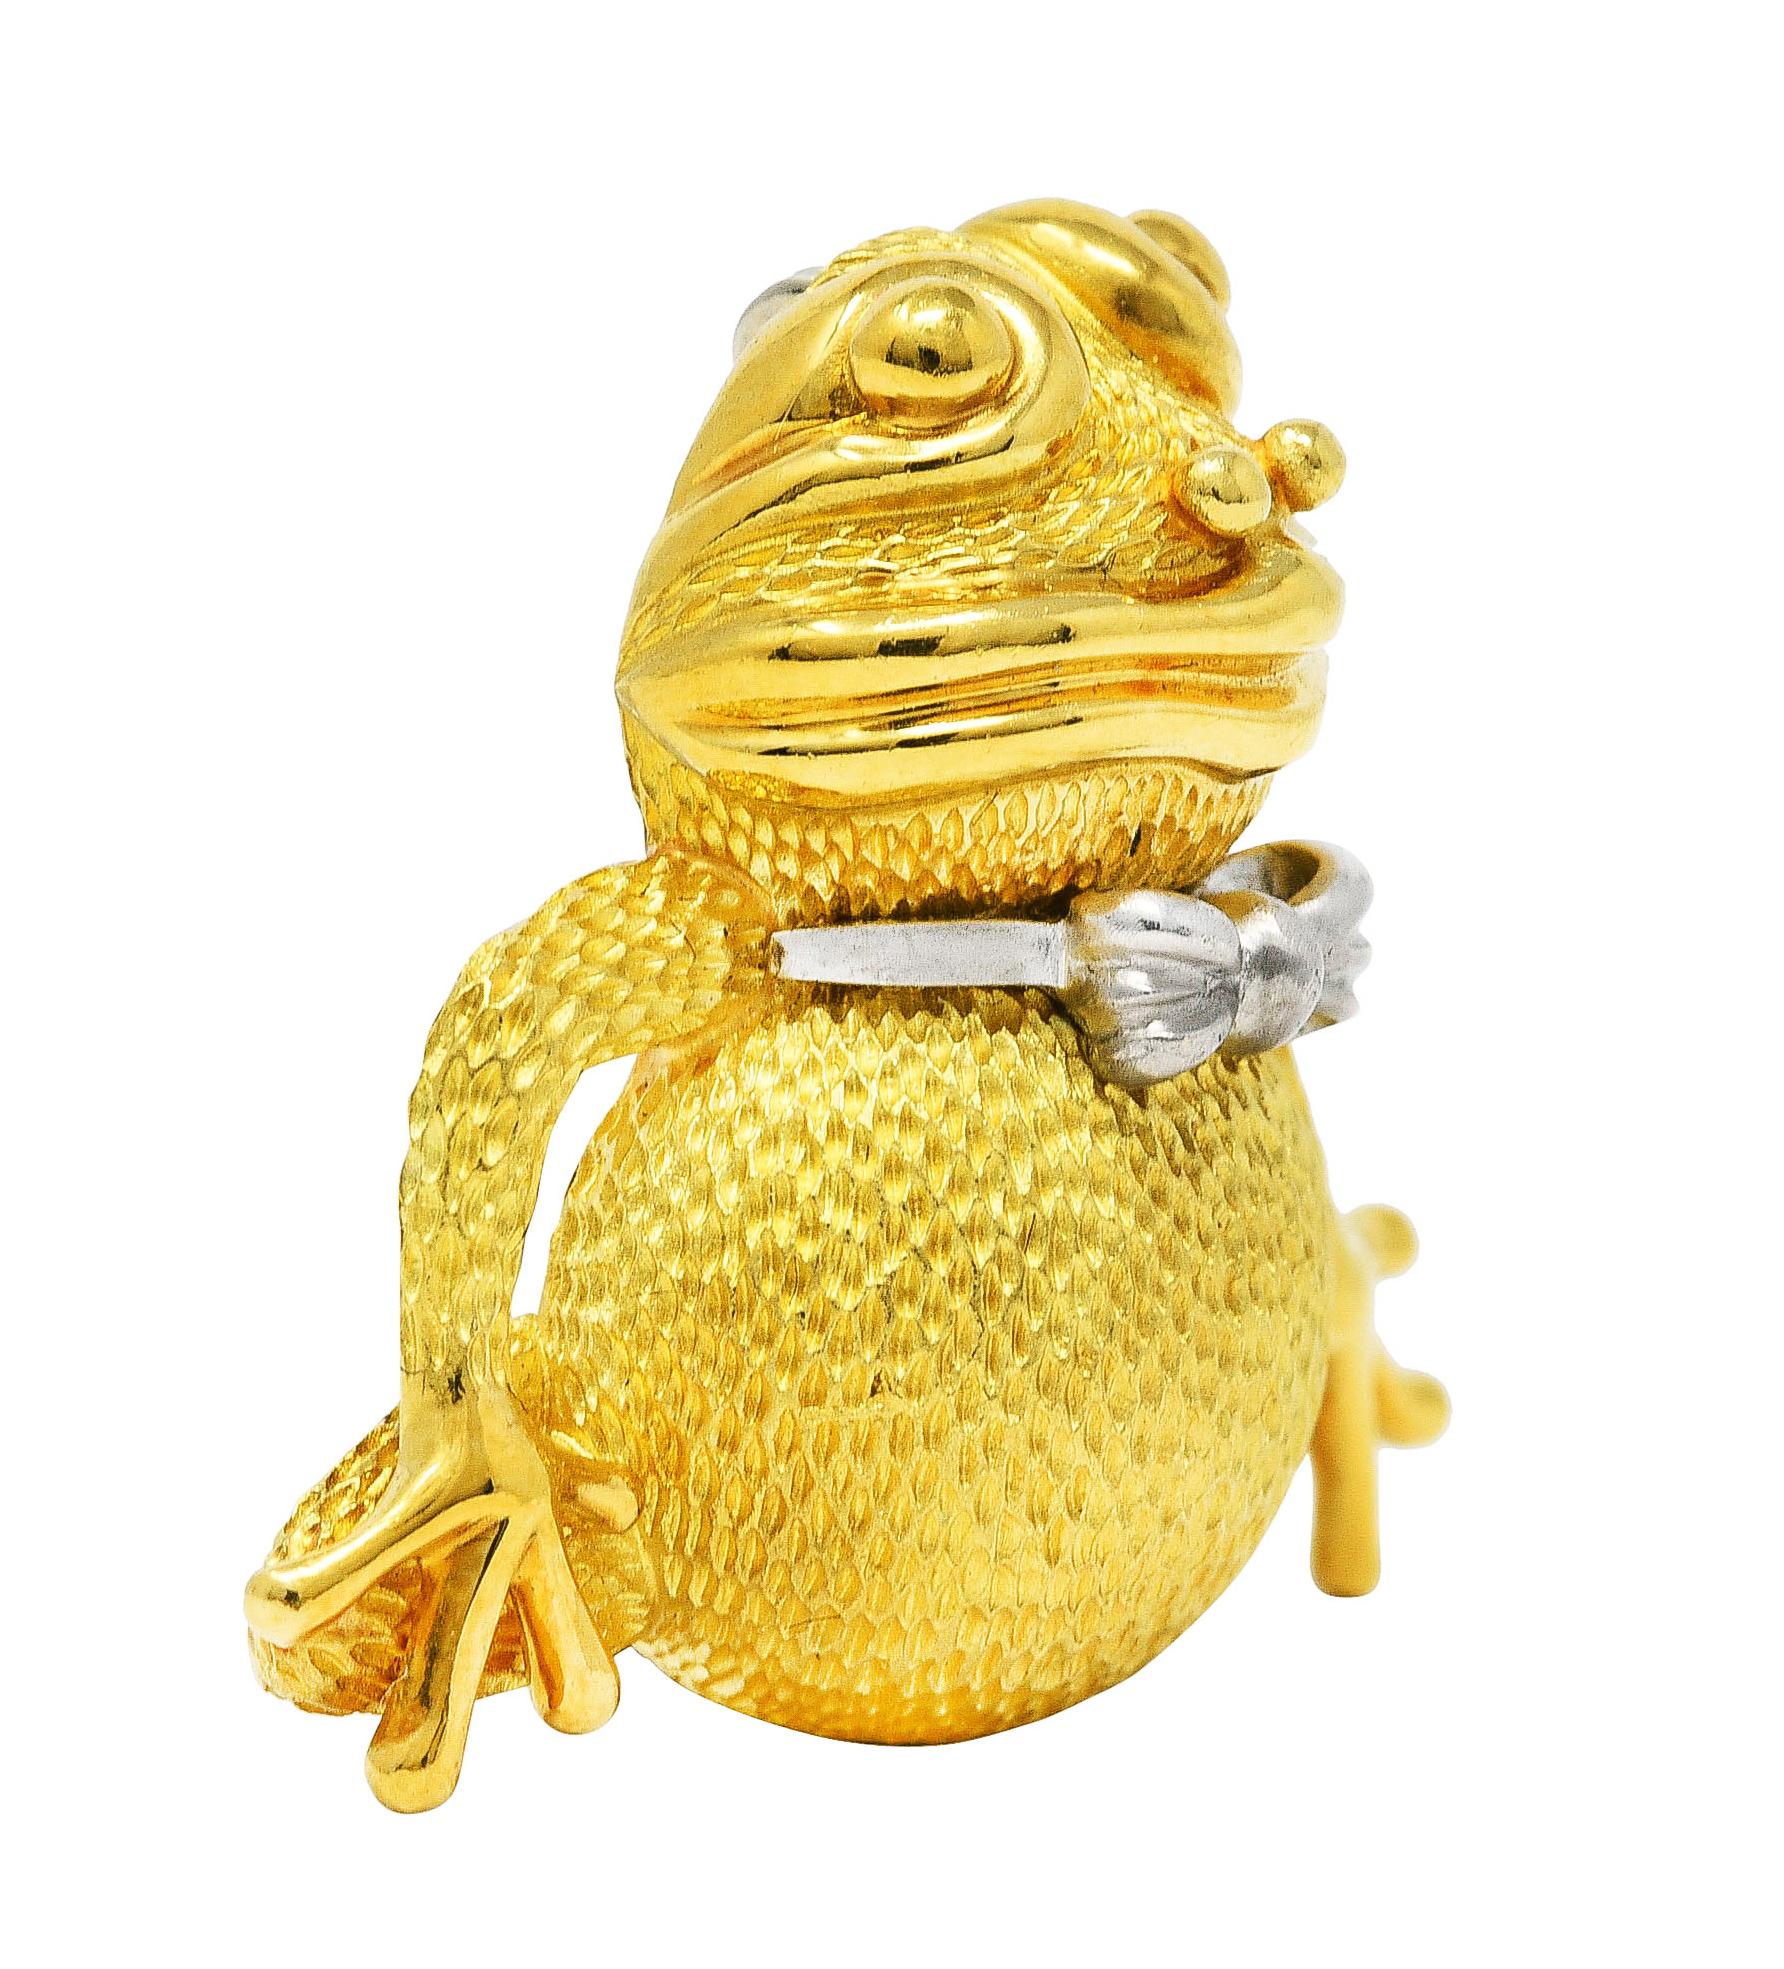 Brooch designed as a cartoonish squatting frog with texture throughout

Featuring a platinum bow tie

Accented with high polished features

Completed by hinged pin stem with locking closure

Stamped 18k and PT950 for 18 karat gold and platinum,